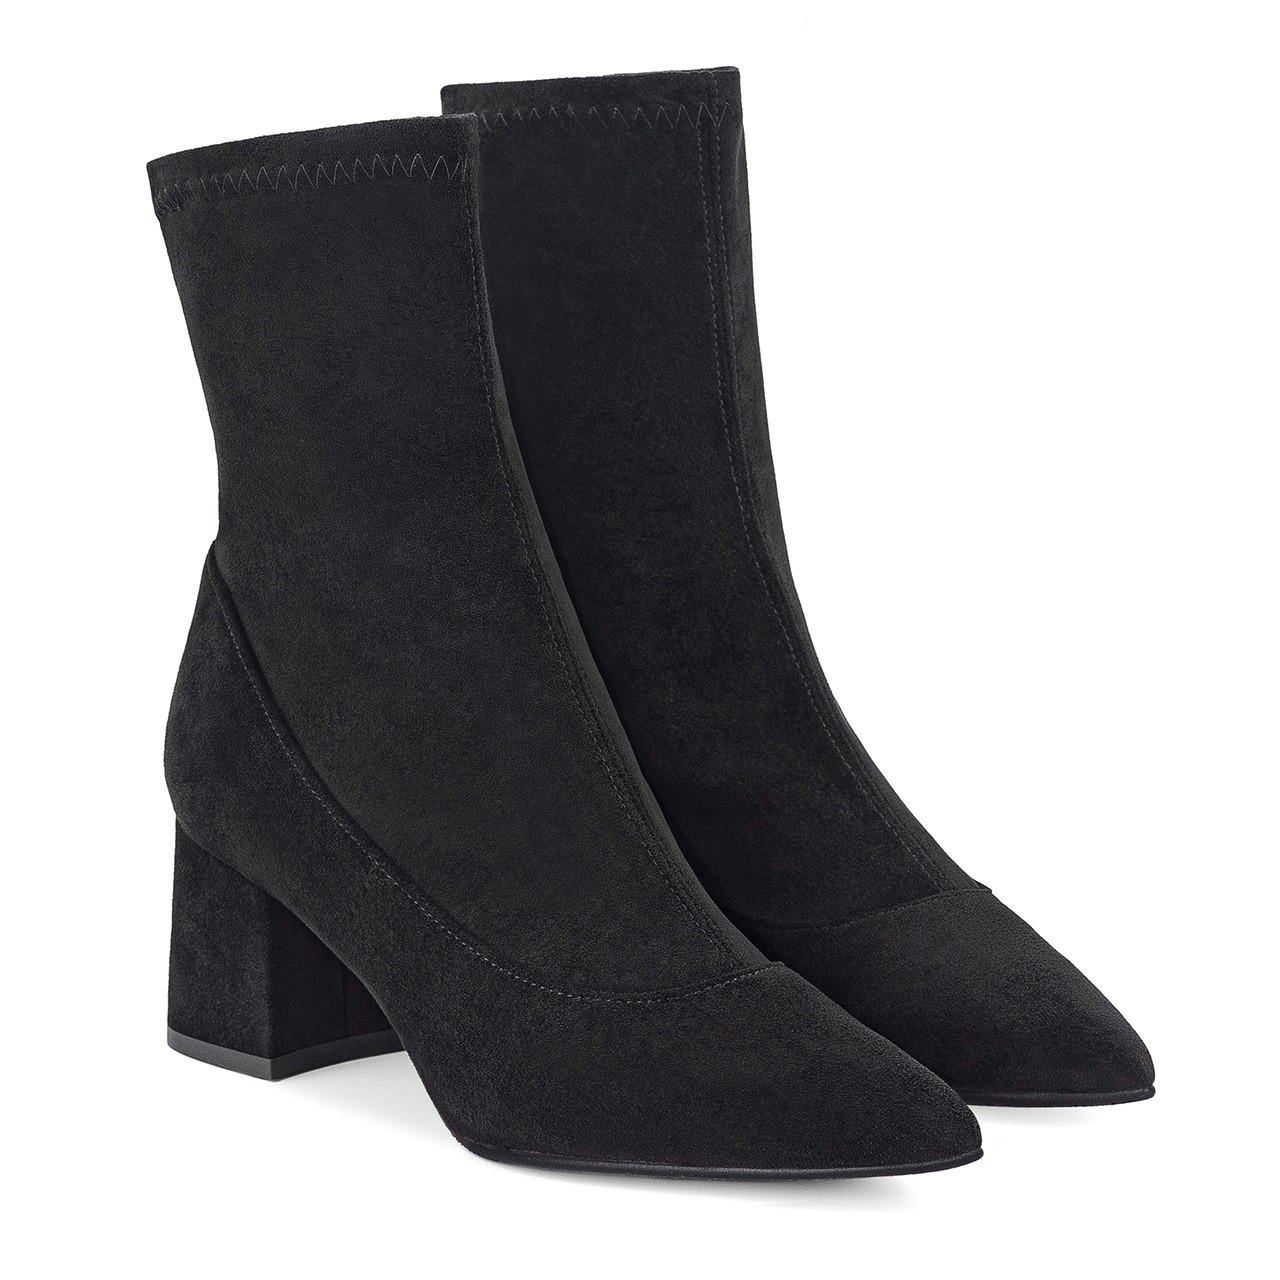 Toy leather ankle boots in black - Loewe | Mytheresa